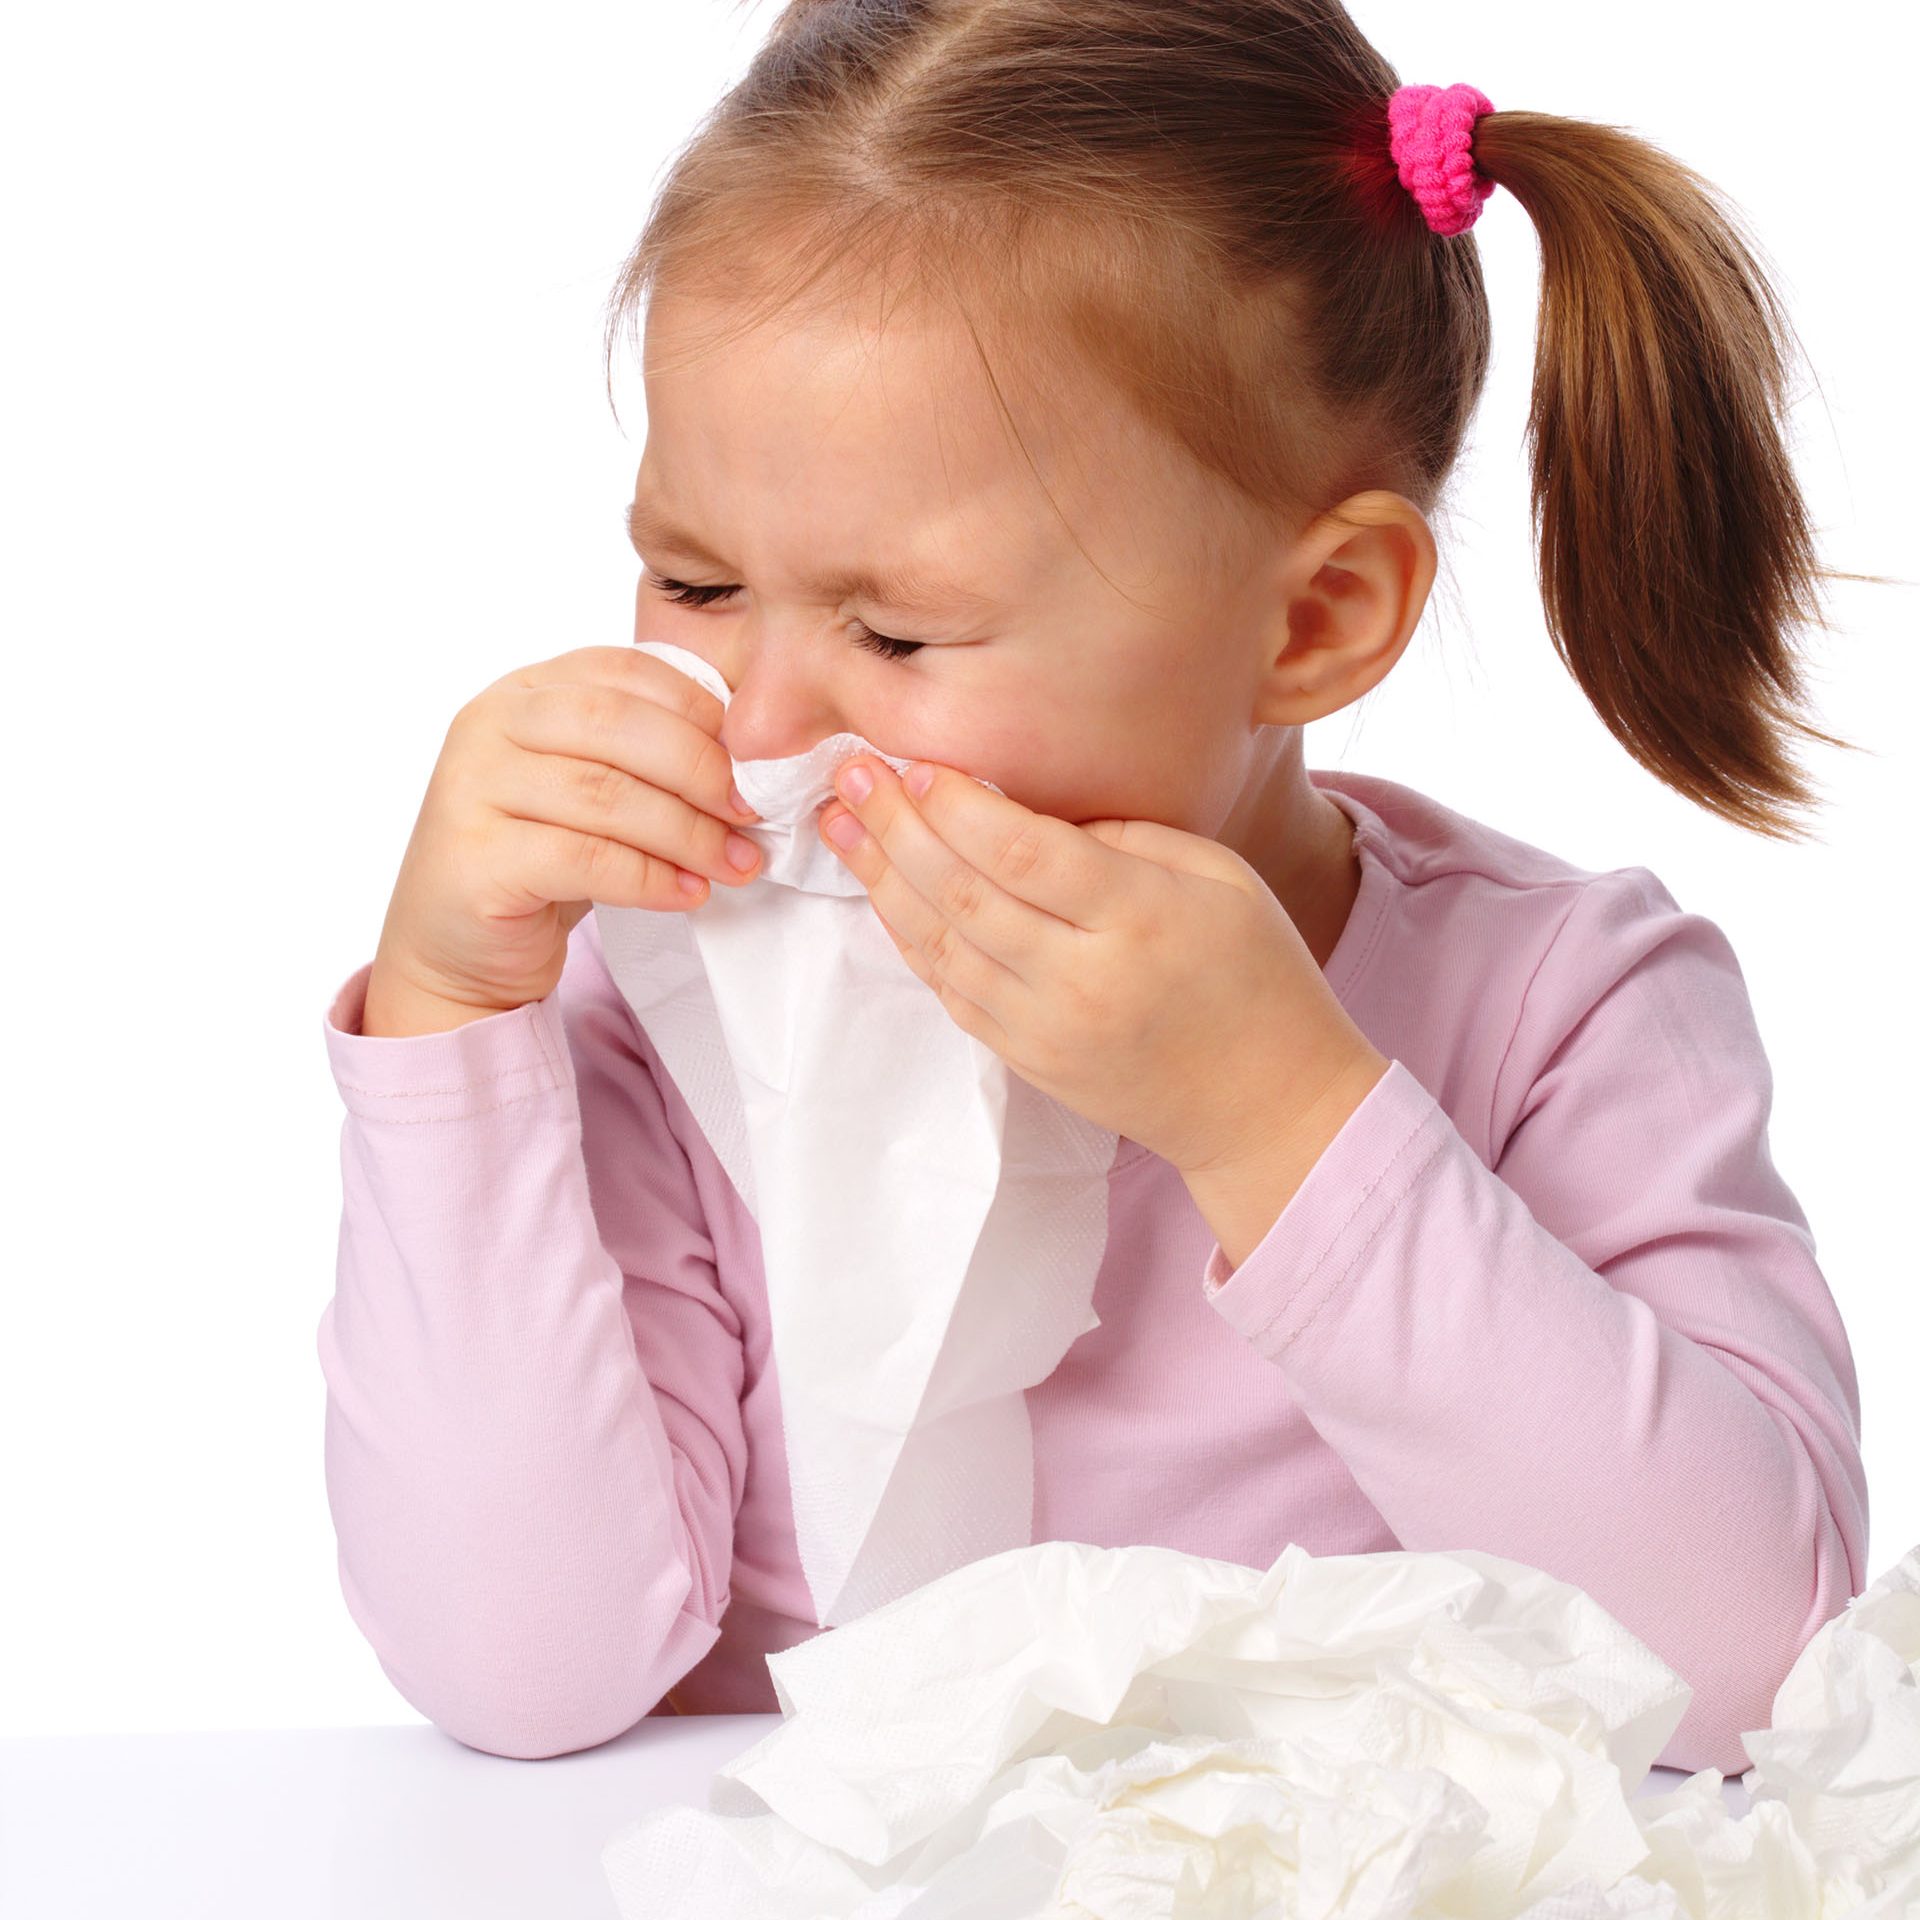 Little girl blows her nose, isolated over white